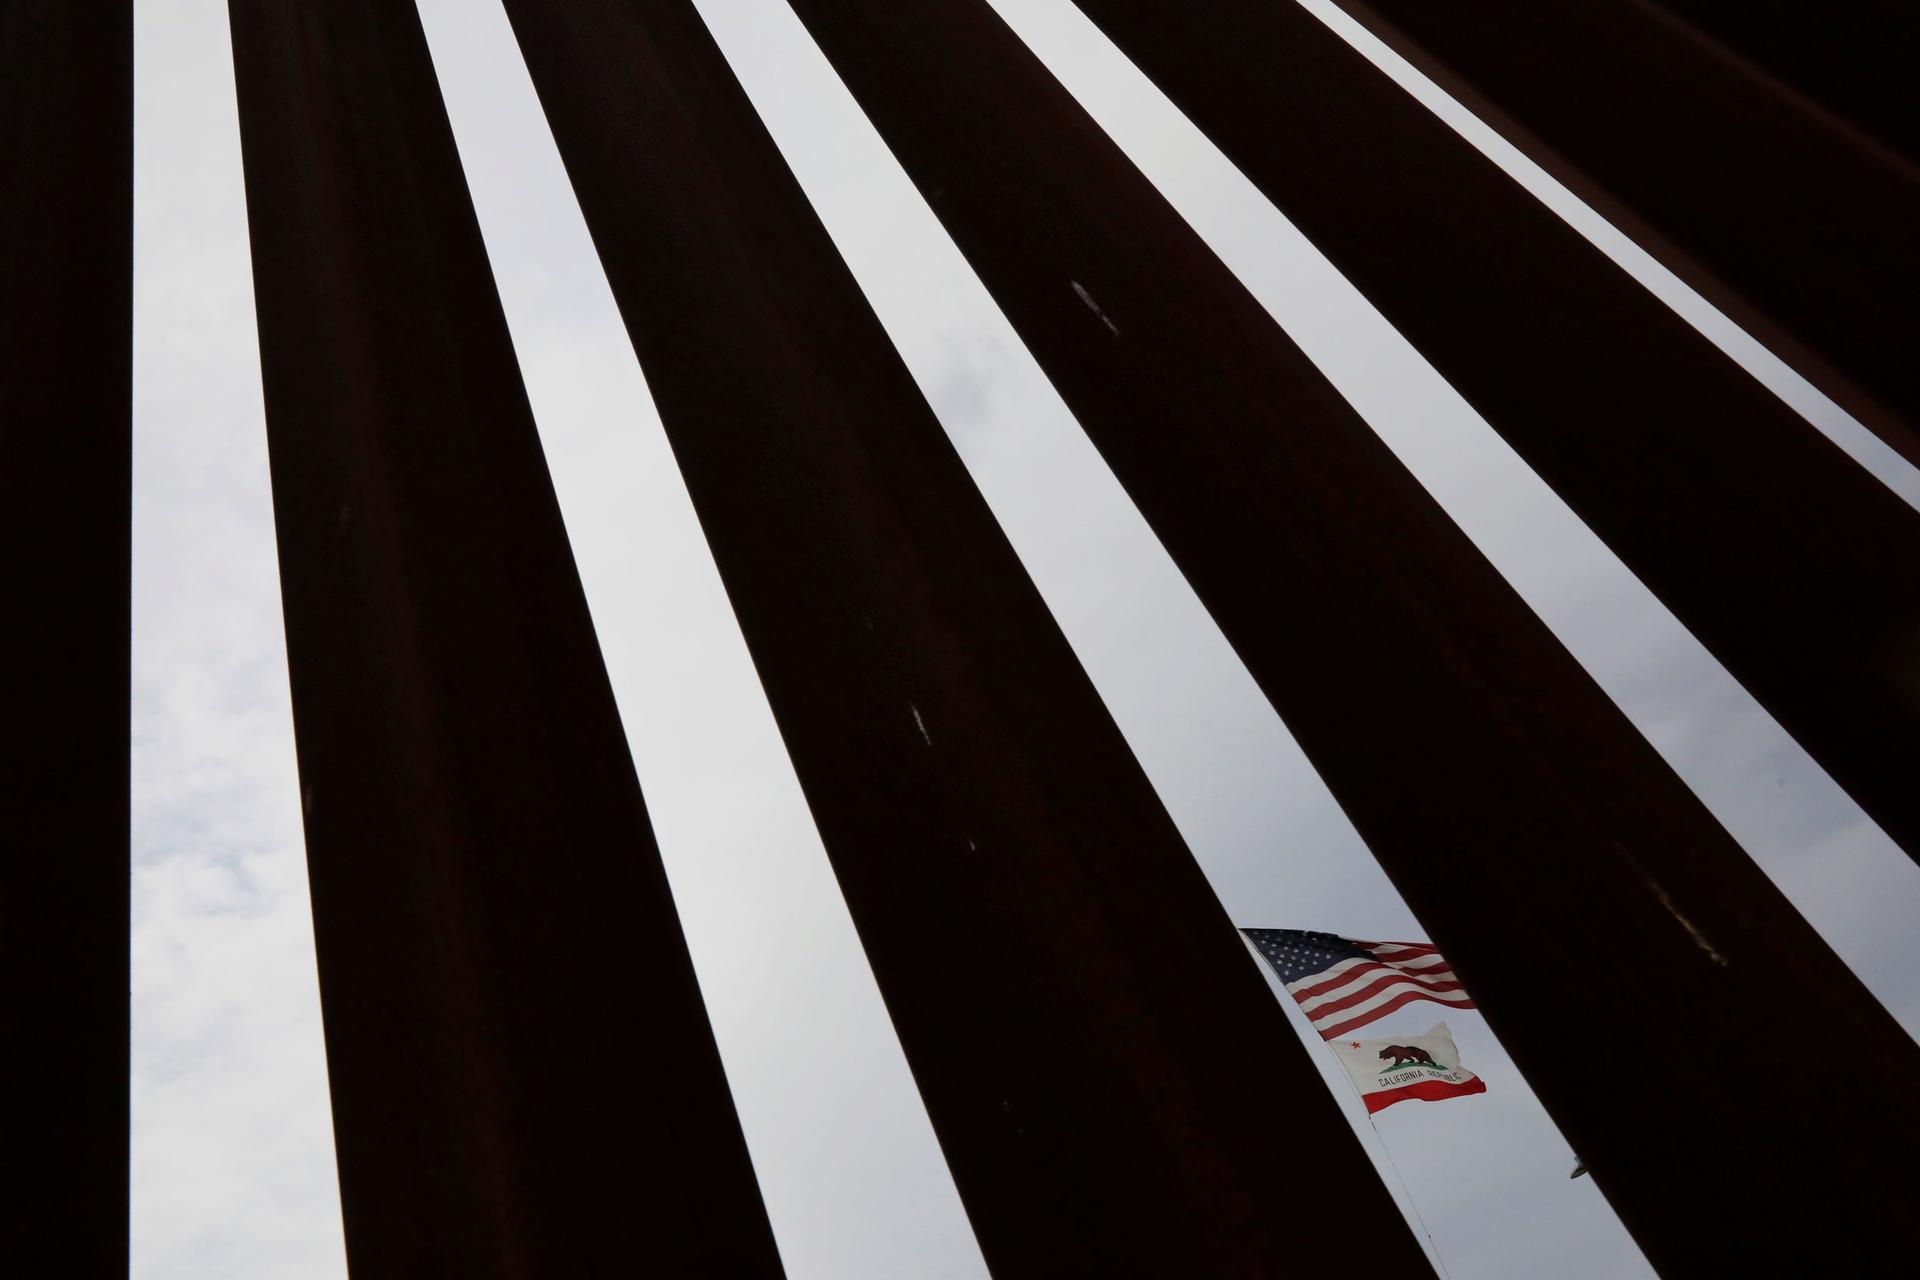 A photograph with dark metal slats are shown in contrast to the blue sky in-between with the US and California flags in one of the slots.